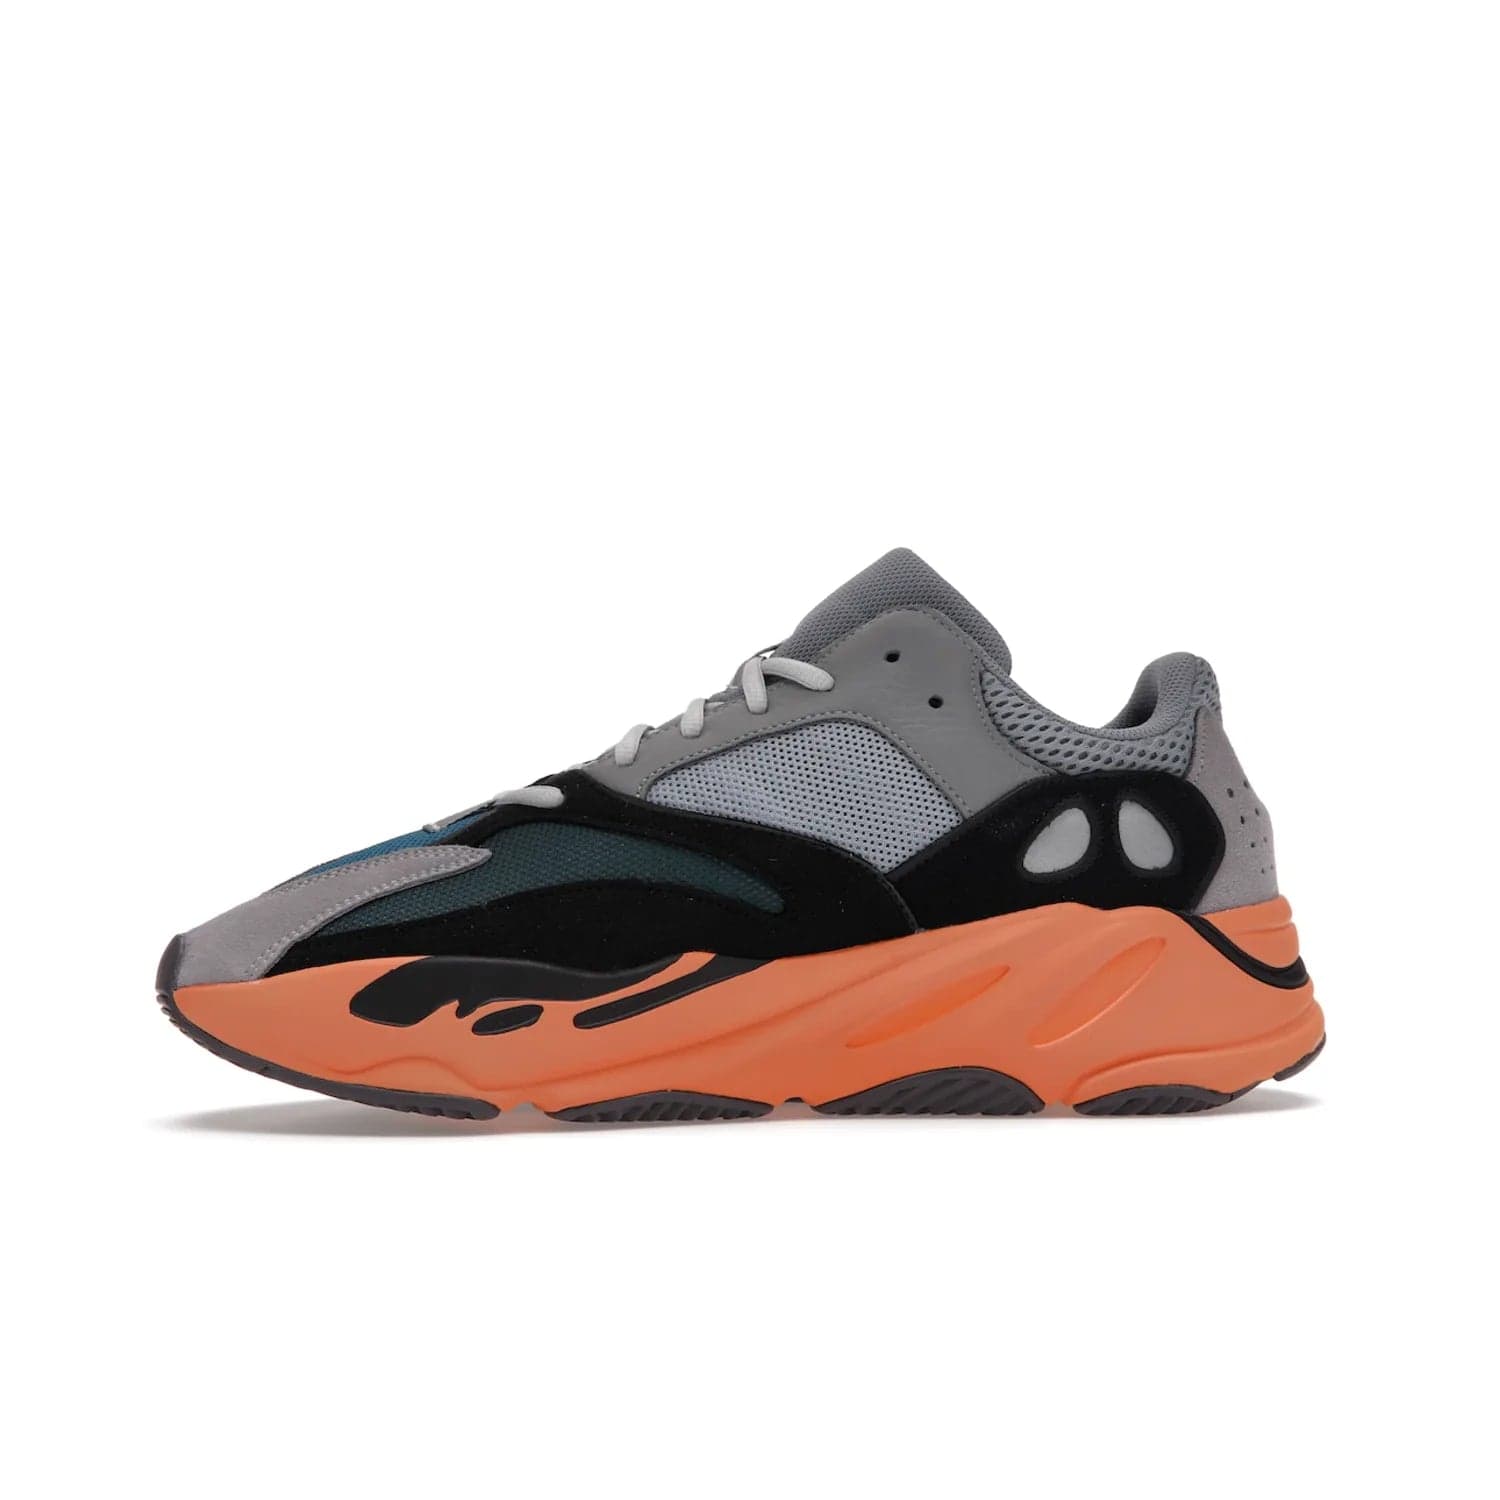 adidas Yeezy Boost 700 Wash Orange - Image 18 - Only at www.BallersClubKickz.com - Introducing the adidas Yeezy Boost 700 Wash Orange. Unique grey leather, suede, mesh upper and teal panels with a chunky Wash Orange Boost midsole. Release October 2021, make a statement today!